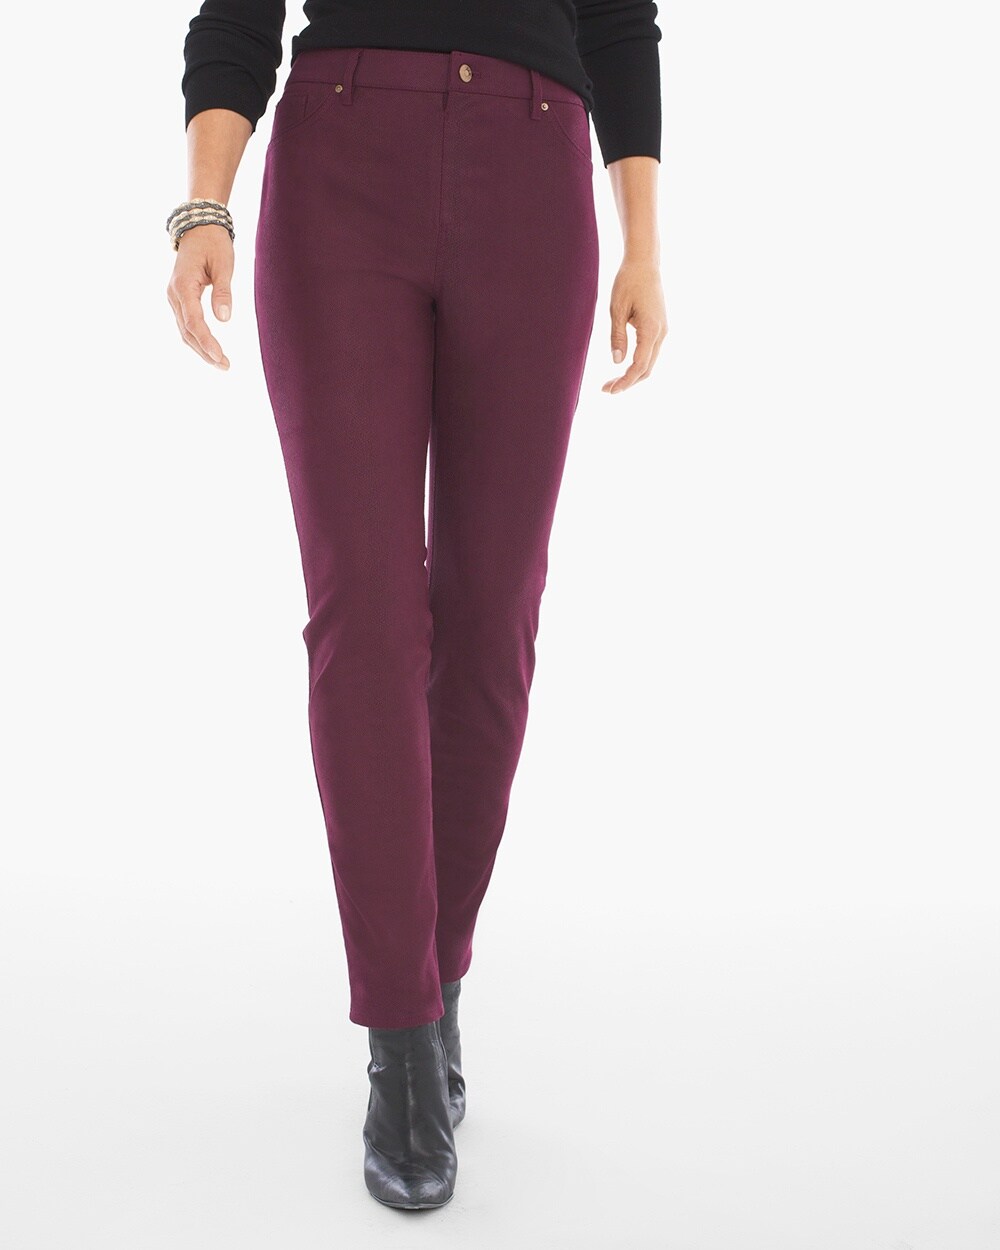 Faux-Suede Knit Pants in Monrovia